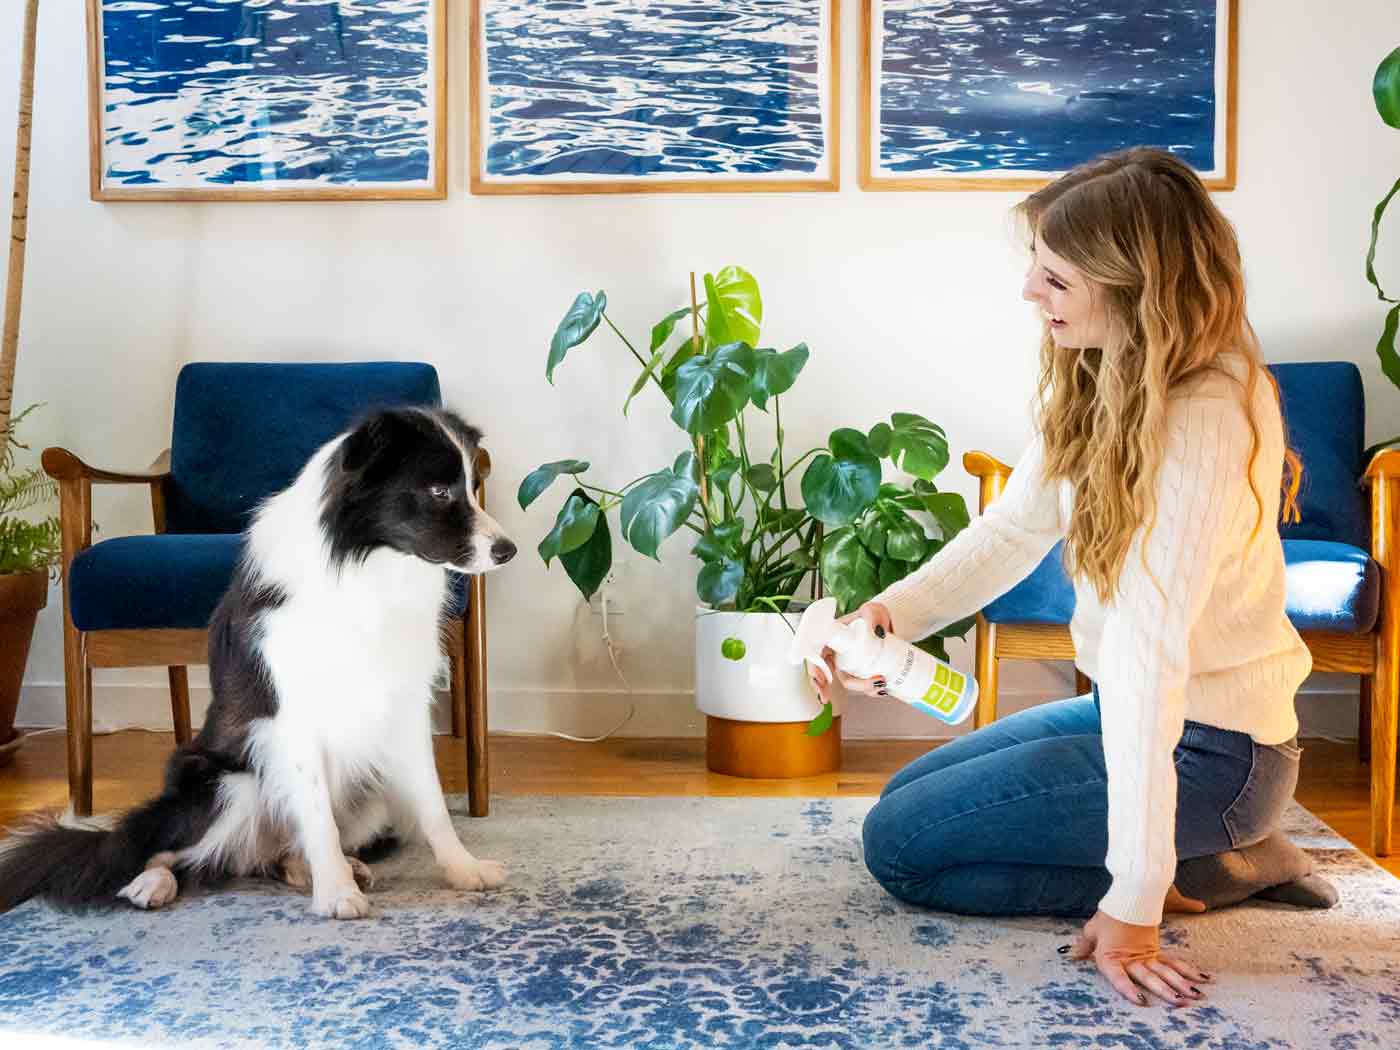 woman-spraying-oxyfresh-pet-deodorizer-on-the-carpet-next-to-her-border-collie-who-looks-interested-in-what-she-is-doing